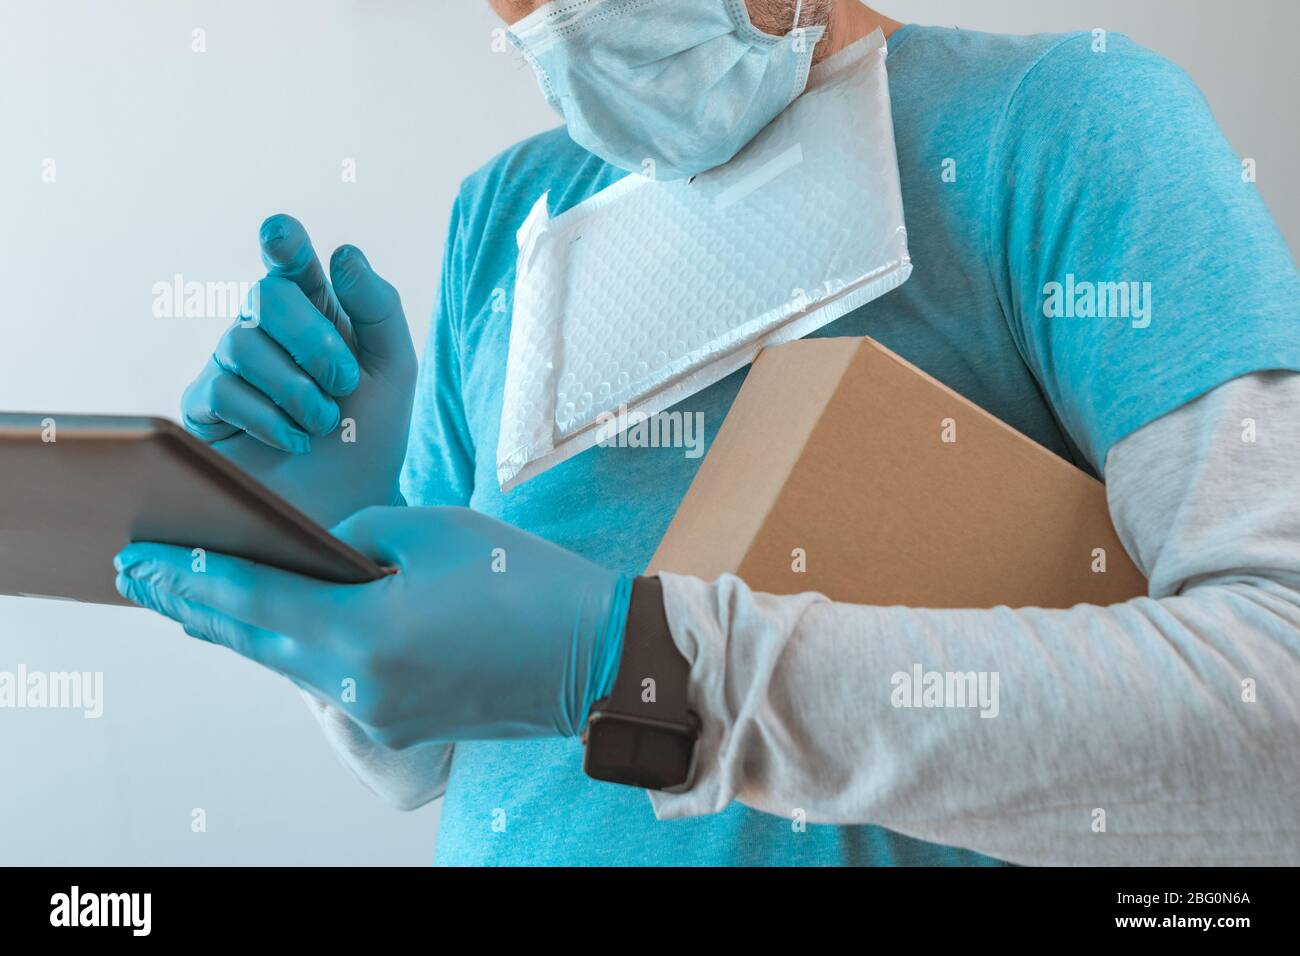 Delivery man with protective clothing using digital tablet with protective gloves during viral infection pandemic, selective focus Stock Photo